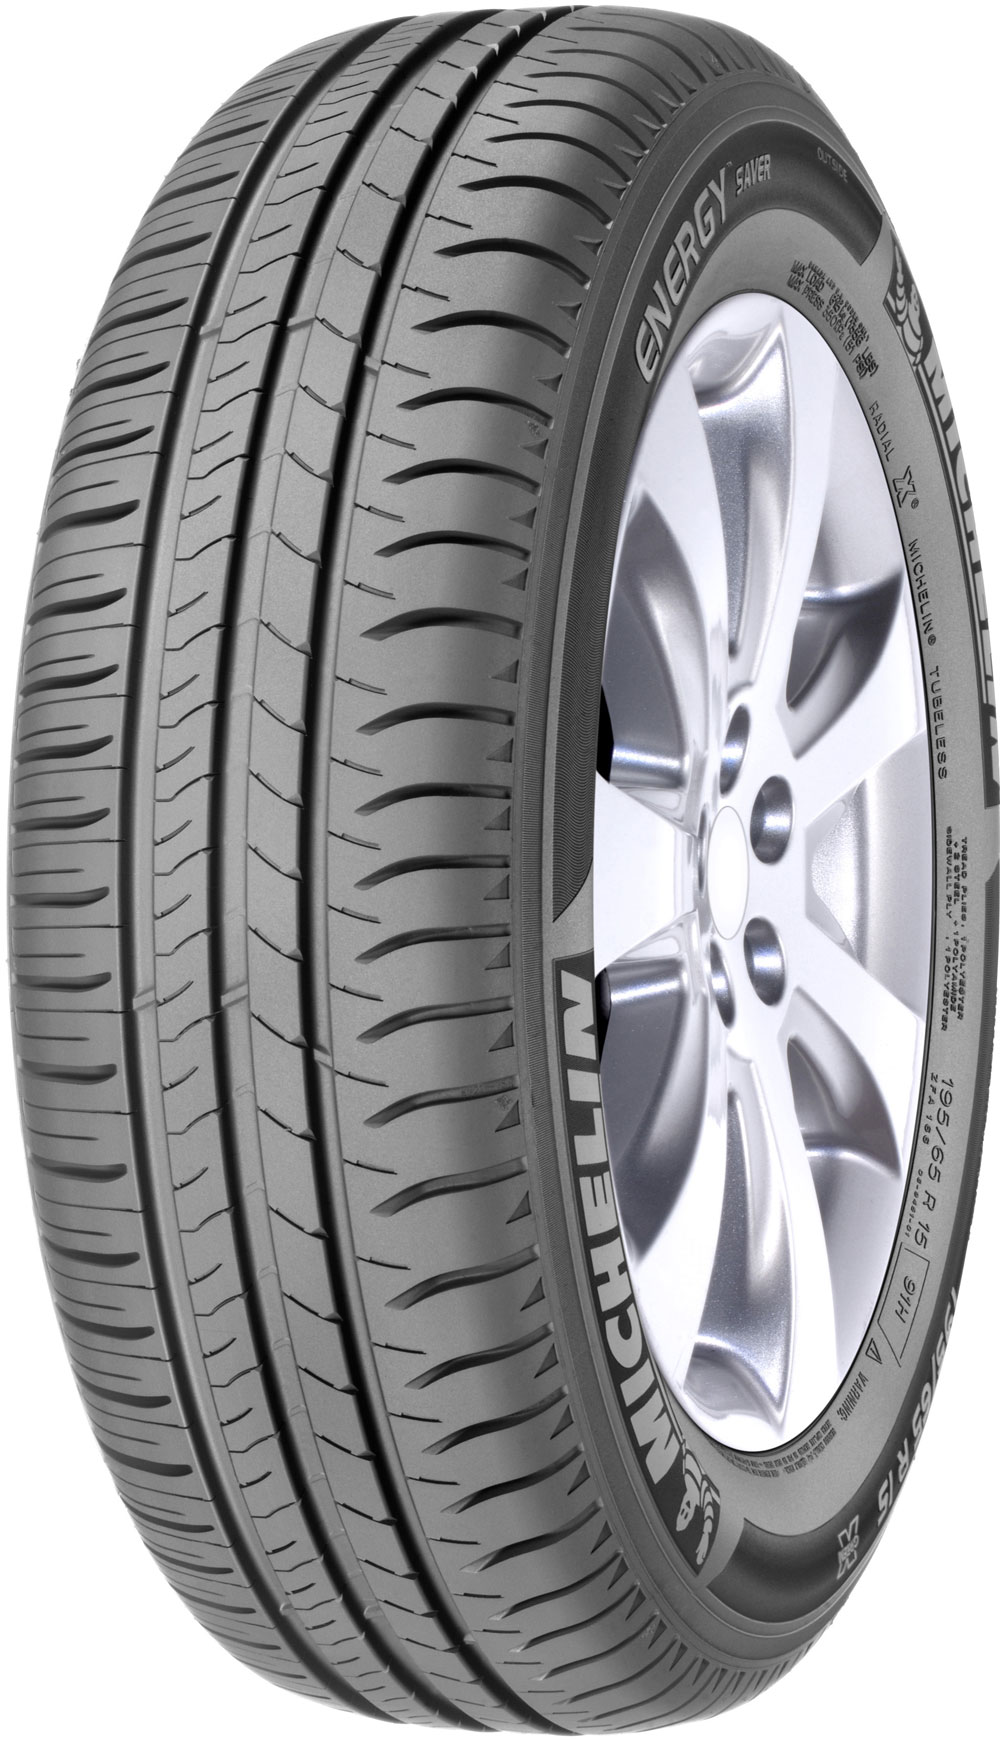 Anvelope auto MICHELIN ENERGY SAVER MO MERCEDES 205/55 R16 91H